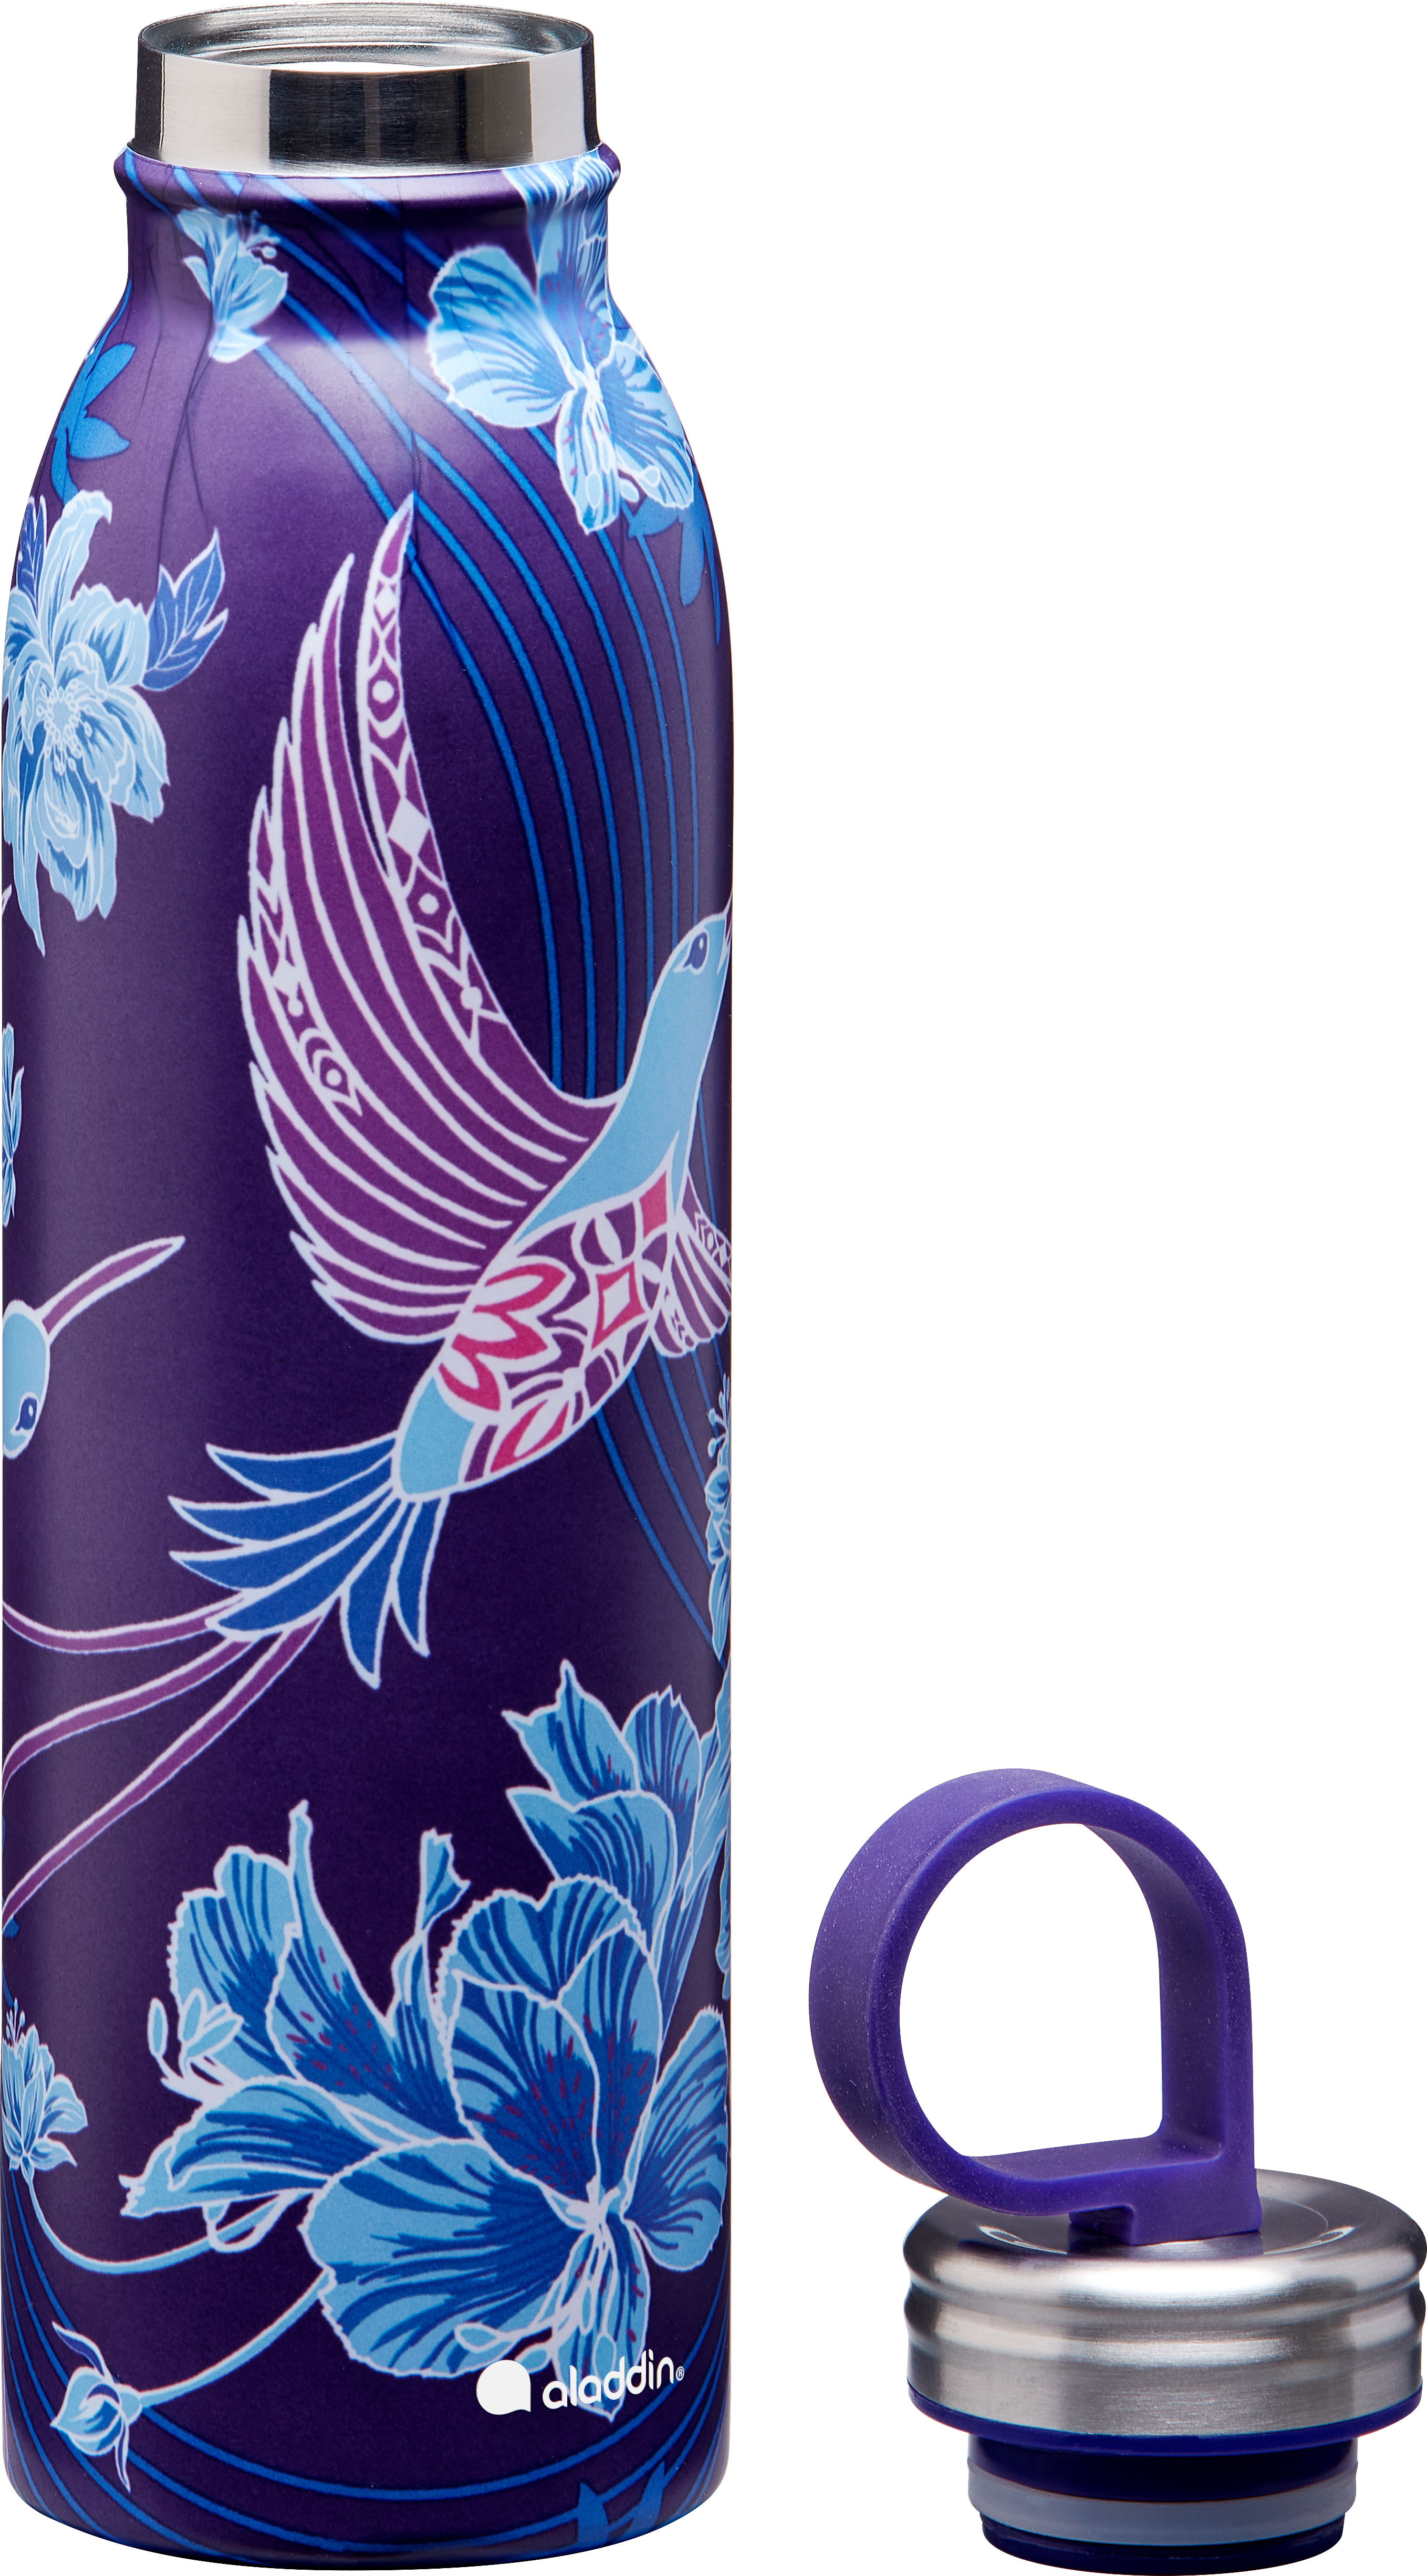 ALADDIN CHILLED THERMAVAC STAINLESS STEEL WATER BOTTLE 0,55 L Aladdin Stainless Steel Water Bottle